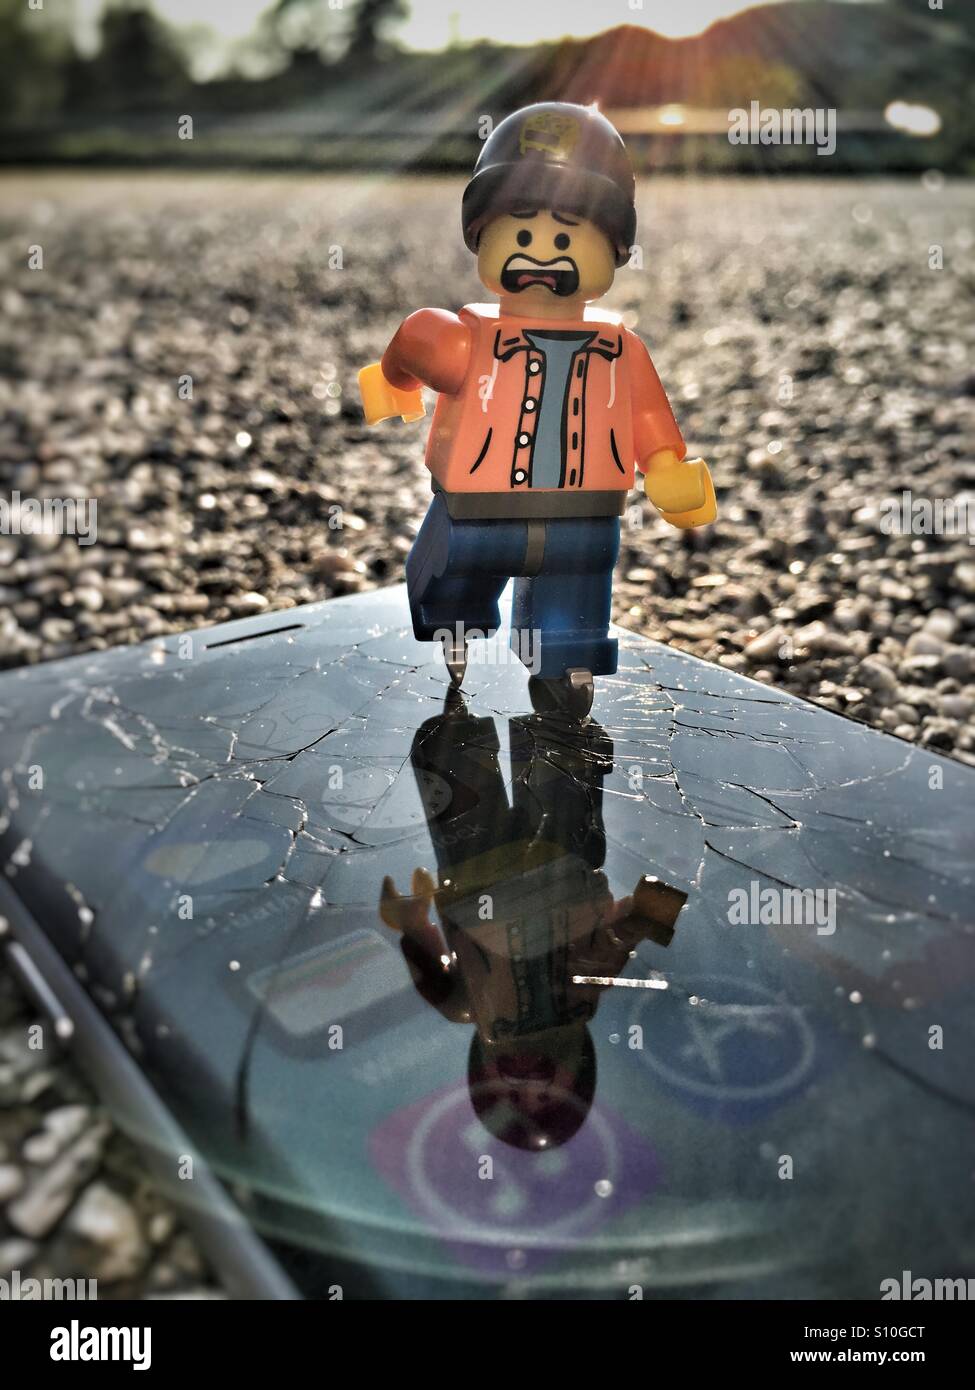 LEGO minifigure 'ice' skating on the broken glass of a phone Photo - Alamy